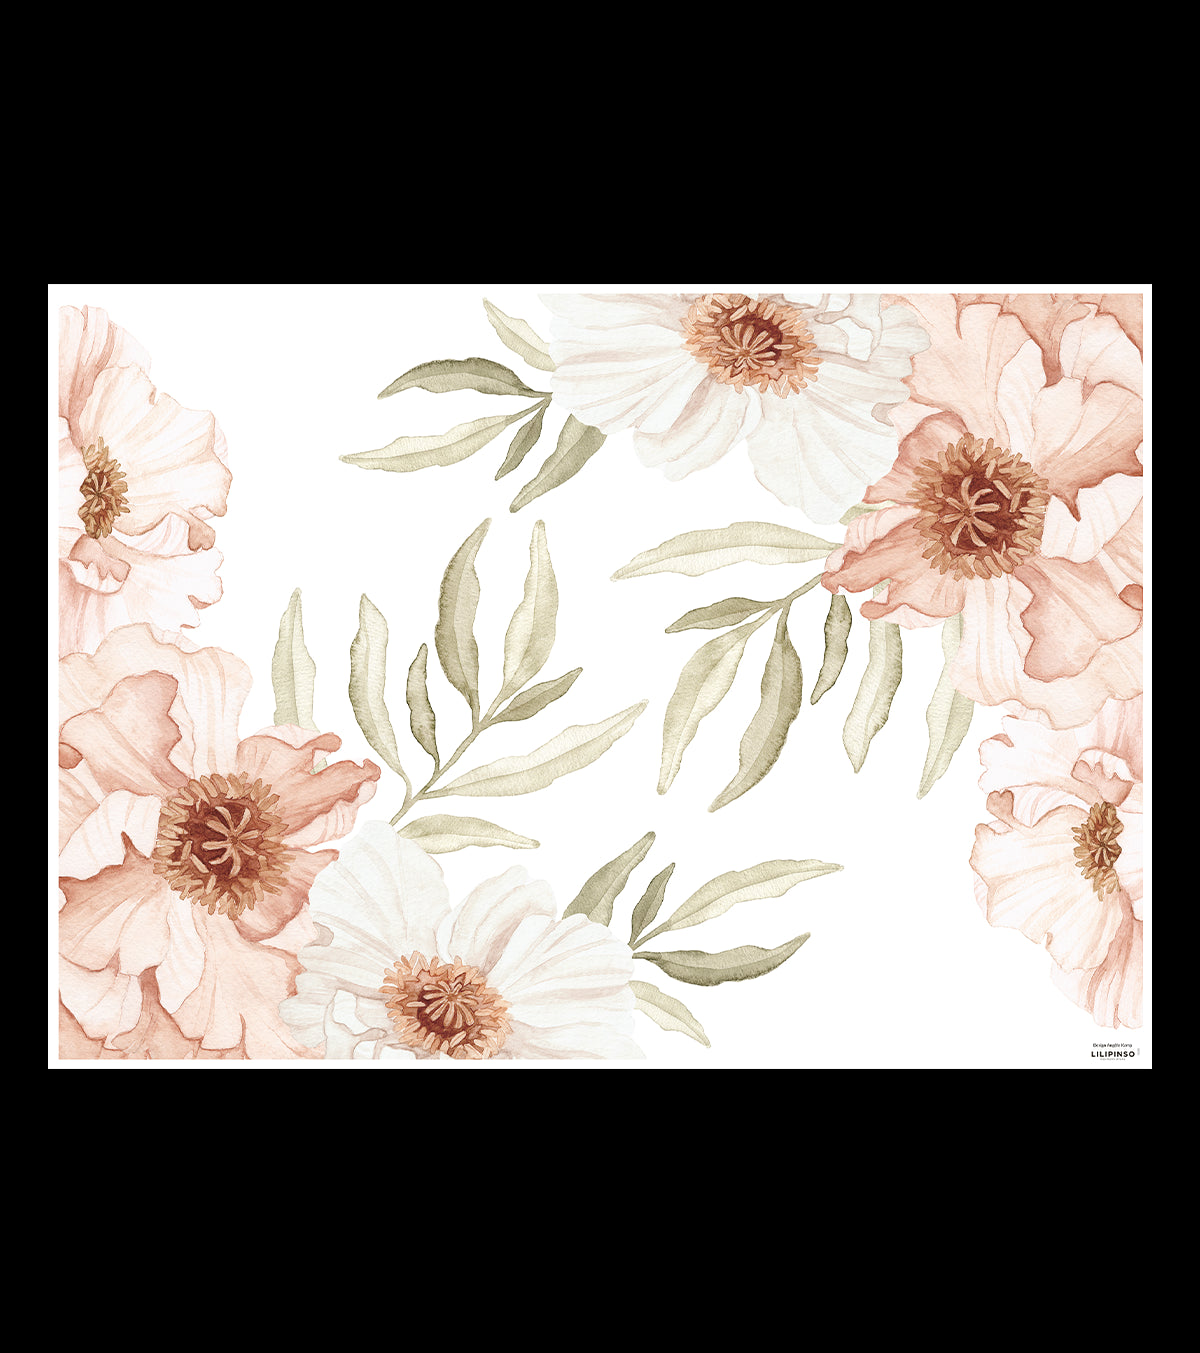 ISLANDIC POPPIES - Wall decals muraux - Large bouquets